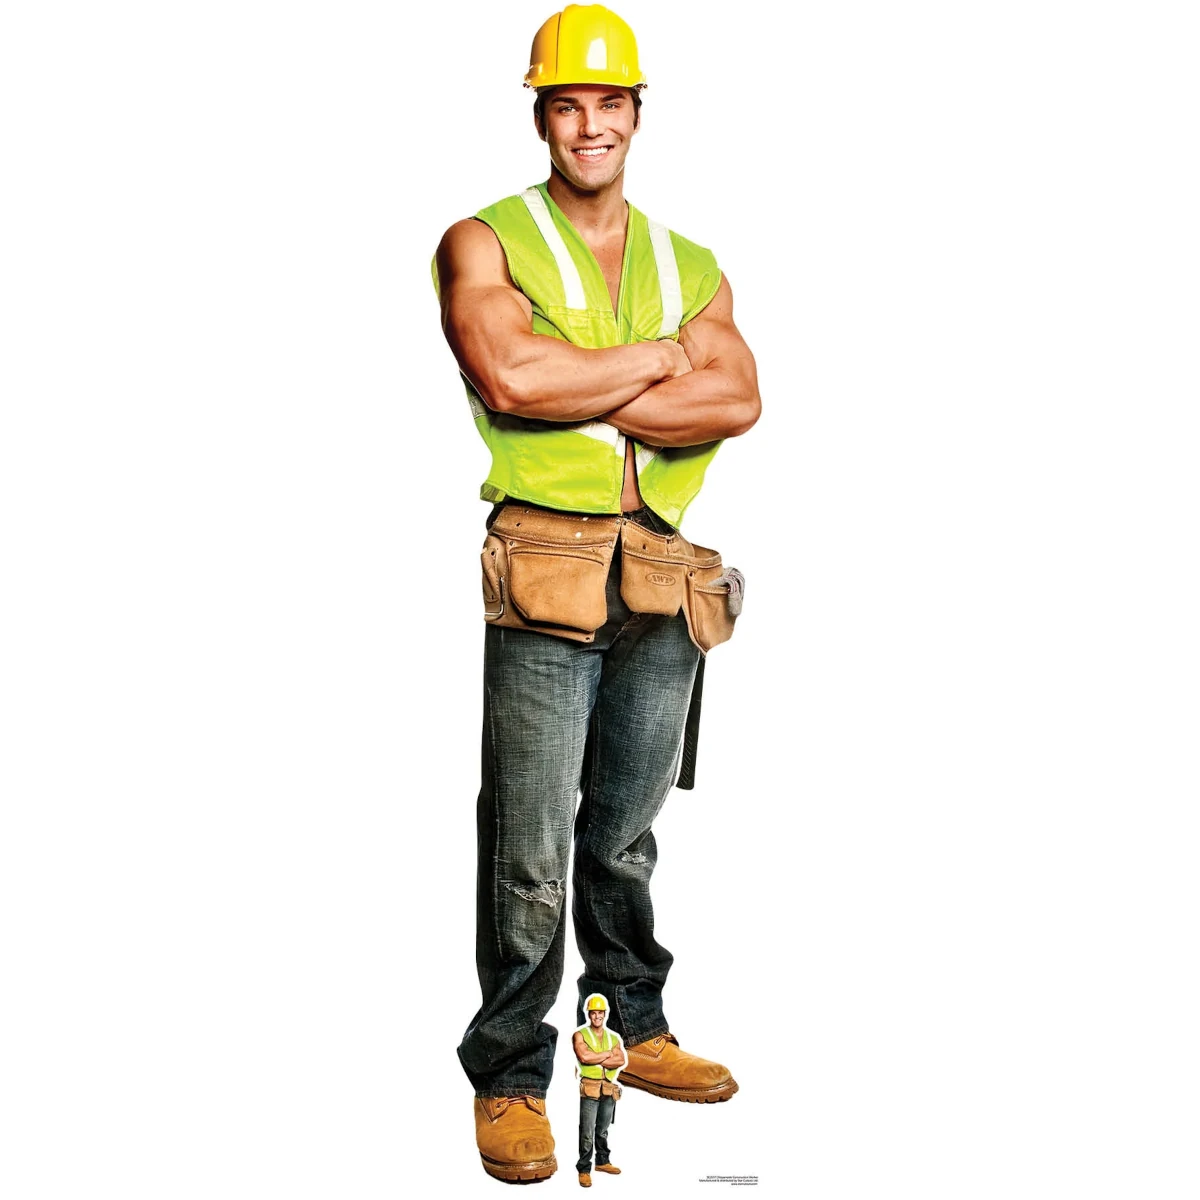 SC2157 Construction Worker (Chippendales) Official Lifesize + Mini Cardboard Cutout Standee Front